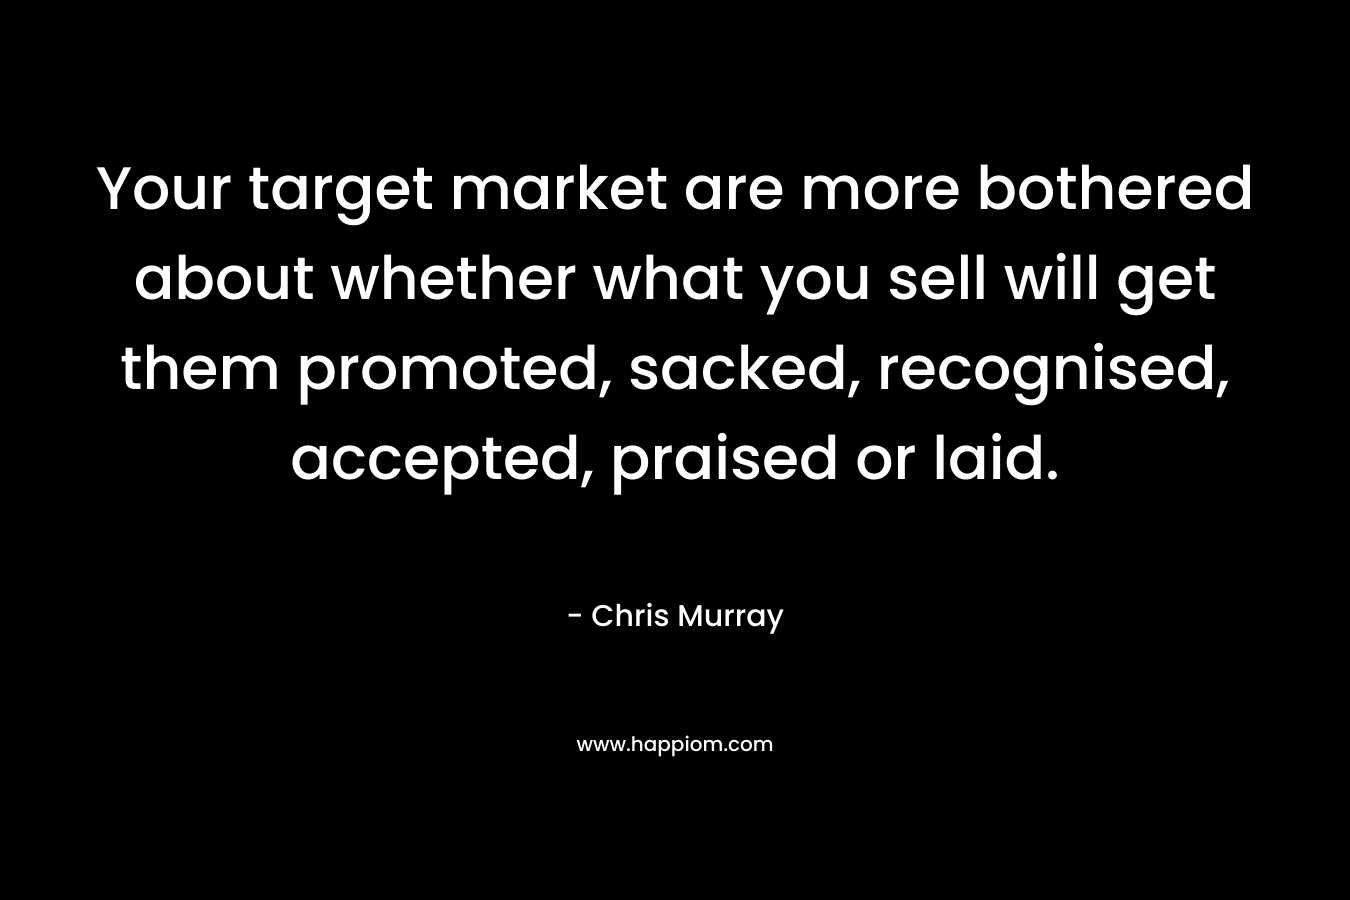 Your target market are more bothered about whether what you sell will get them promoted, sacked, recognised, accepted, praised or laid.